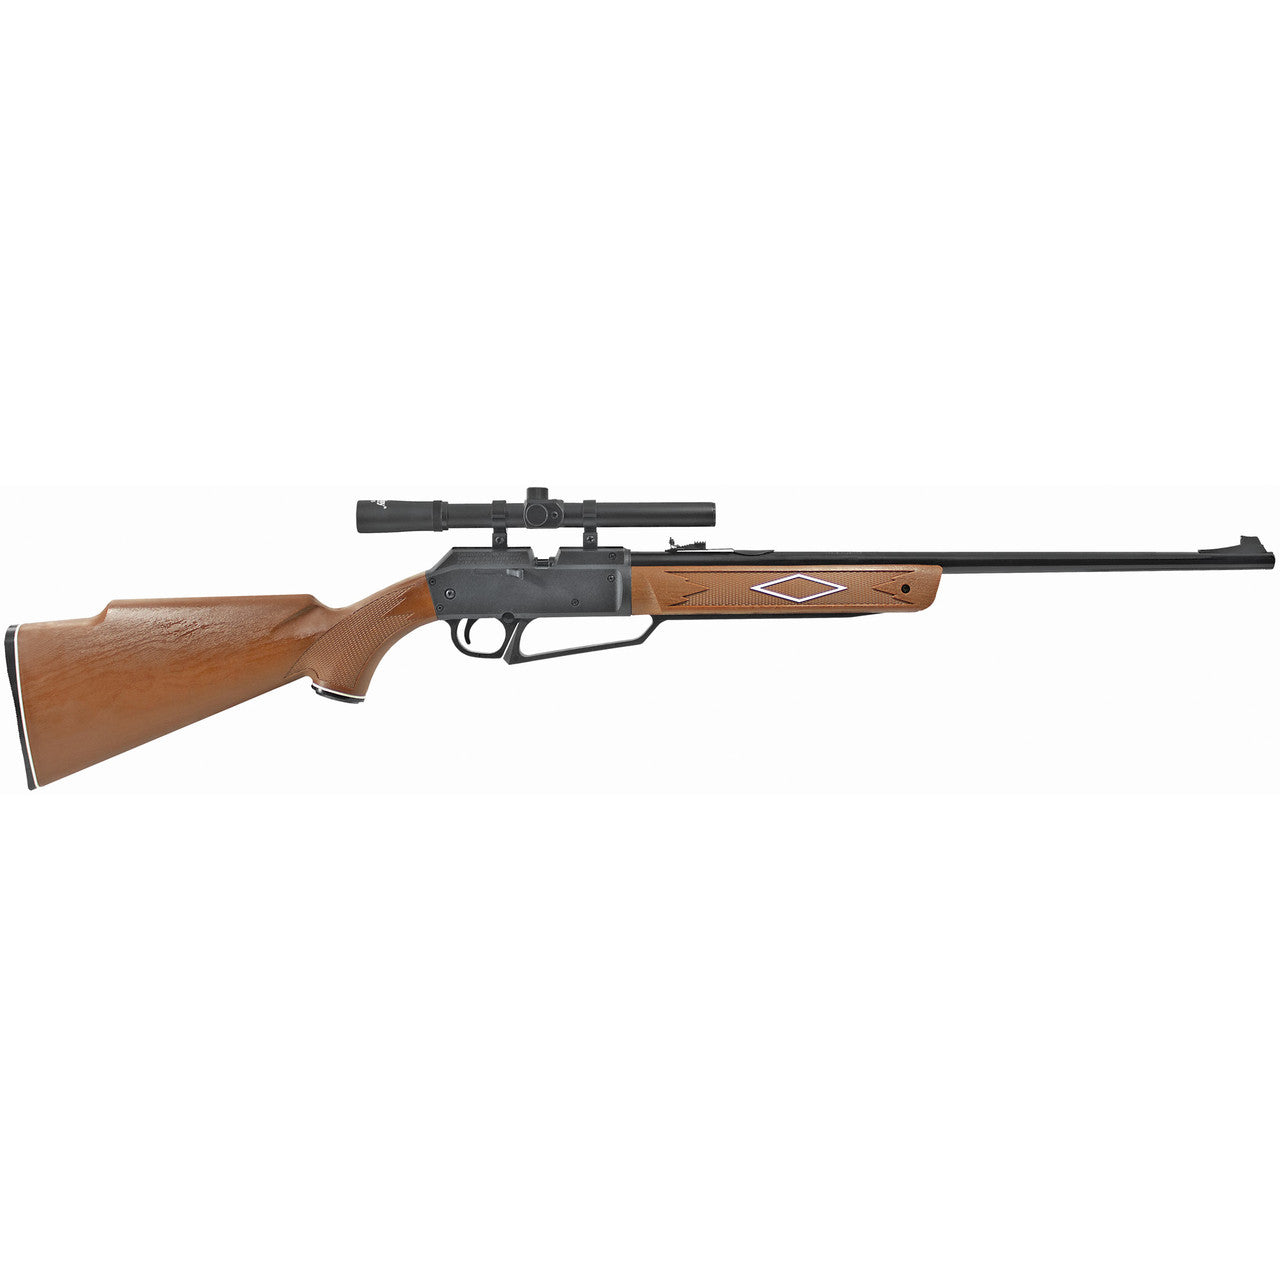 Daisy Powerline 880 Air Rifle with Scope .177 Pellet/BB 800 FPS BLACK Synthetic Stock [FC-039256828809] Daisy Powerline 880 Air Rifle with Scope .177 Pellet/BB 800 FPS